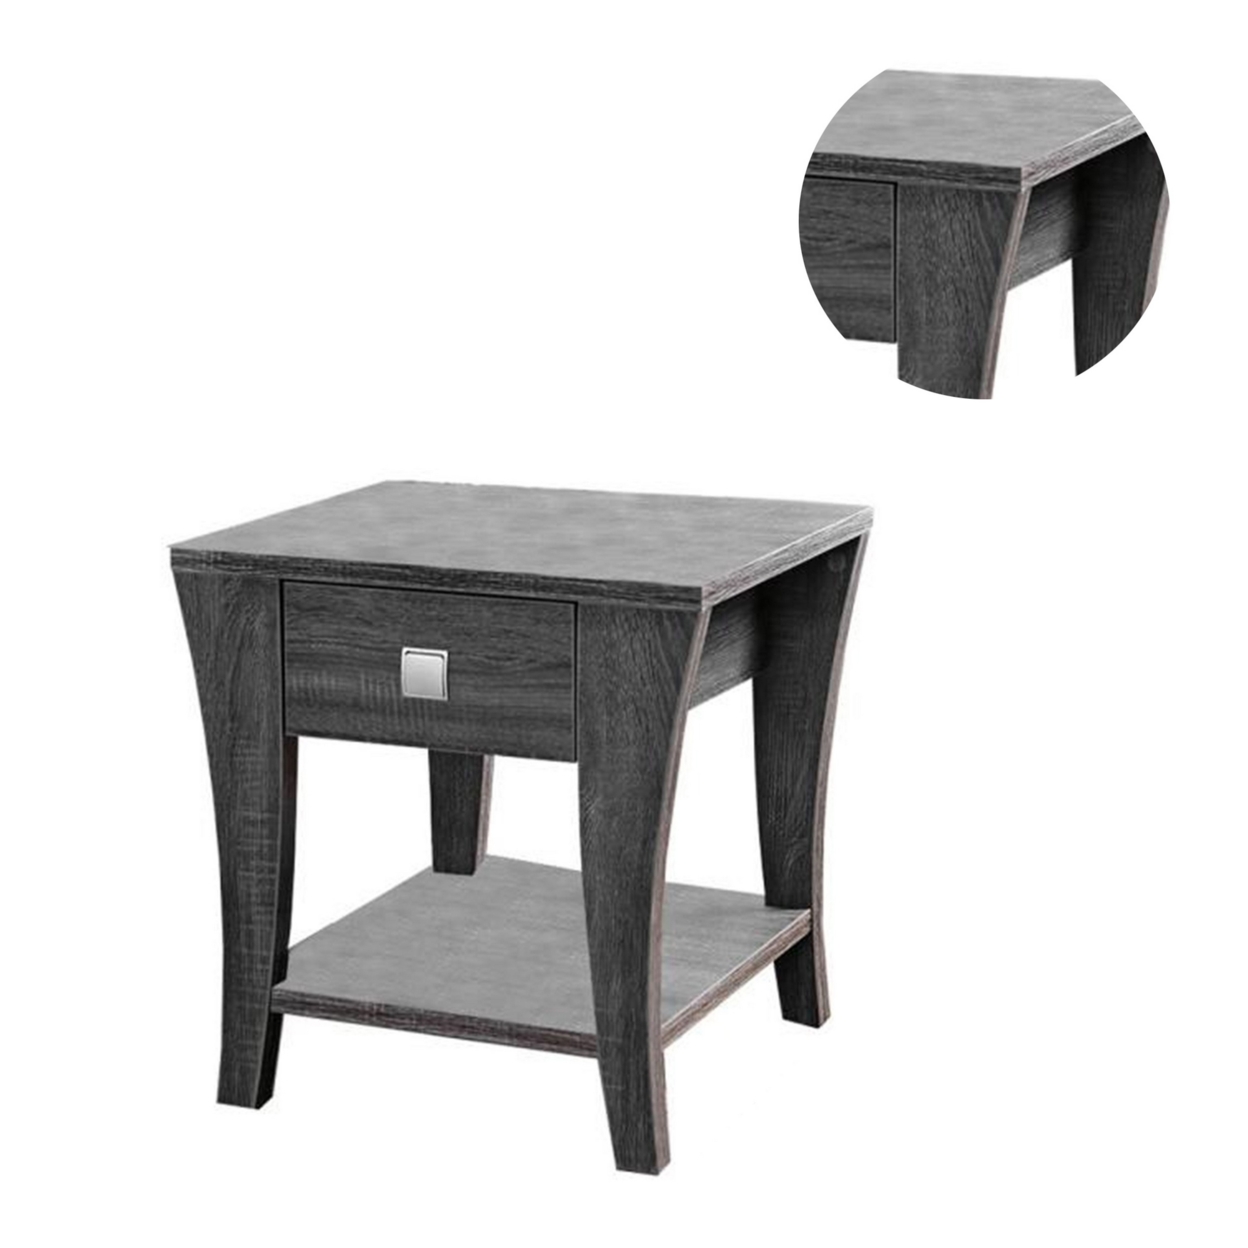 Wooden End Table With Swooping Curled Legs, Gray- Saltoro Sherpi